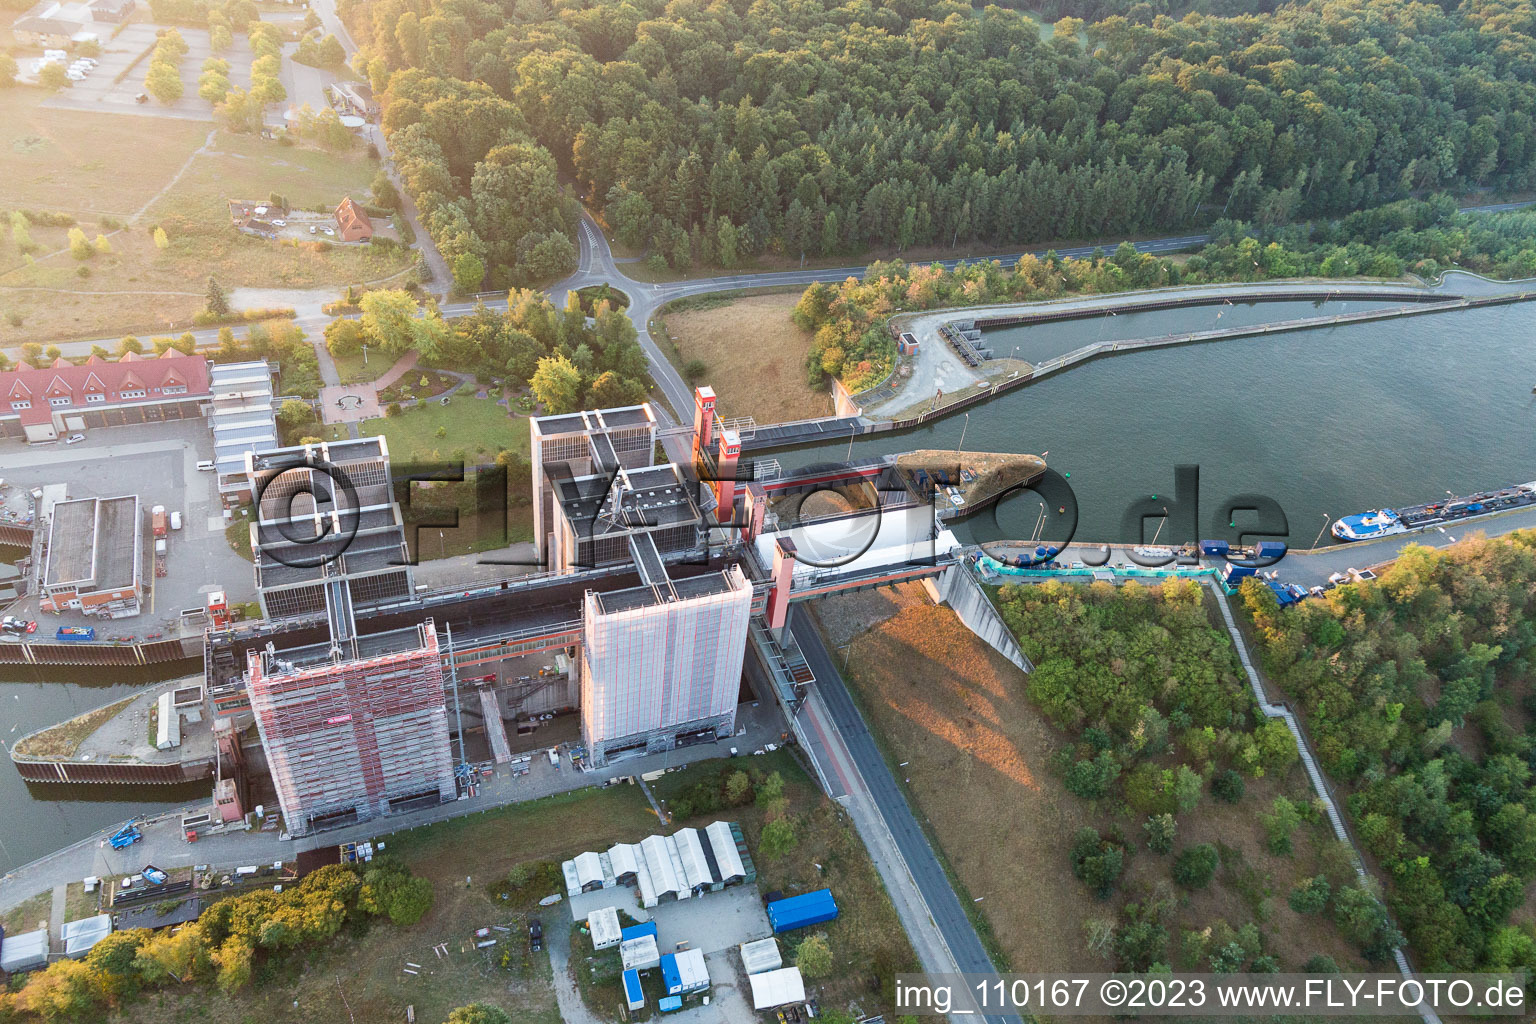 Boat lift and locks plants on the banks of the waterway of the Elbe side channel in Scharnebeck in the state Lower Saxony, Germany viewn from the air